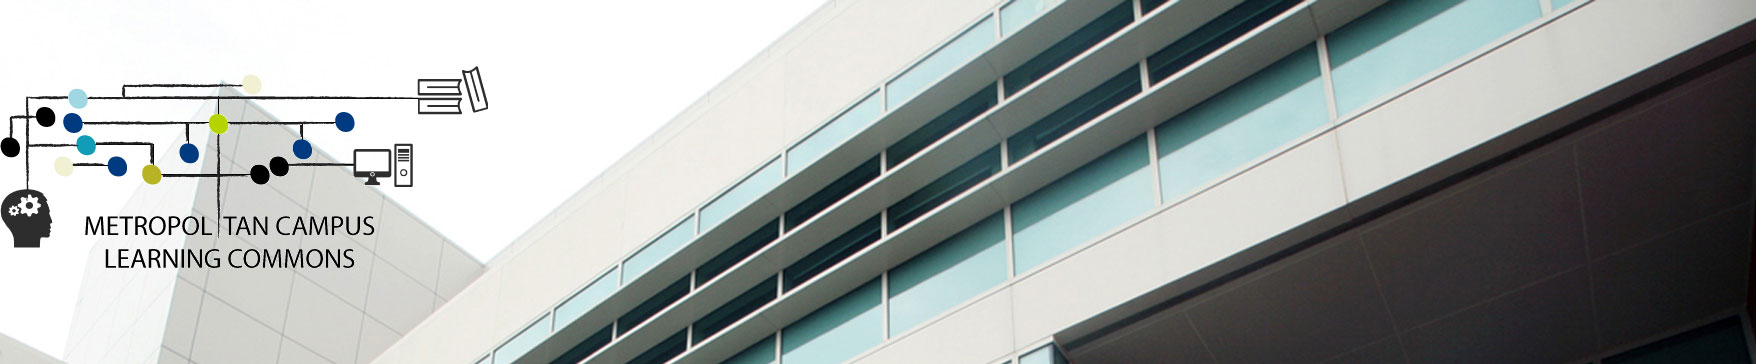 metro campus learning commons header image